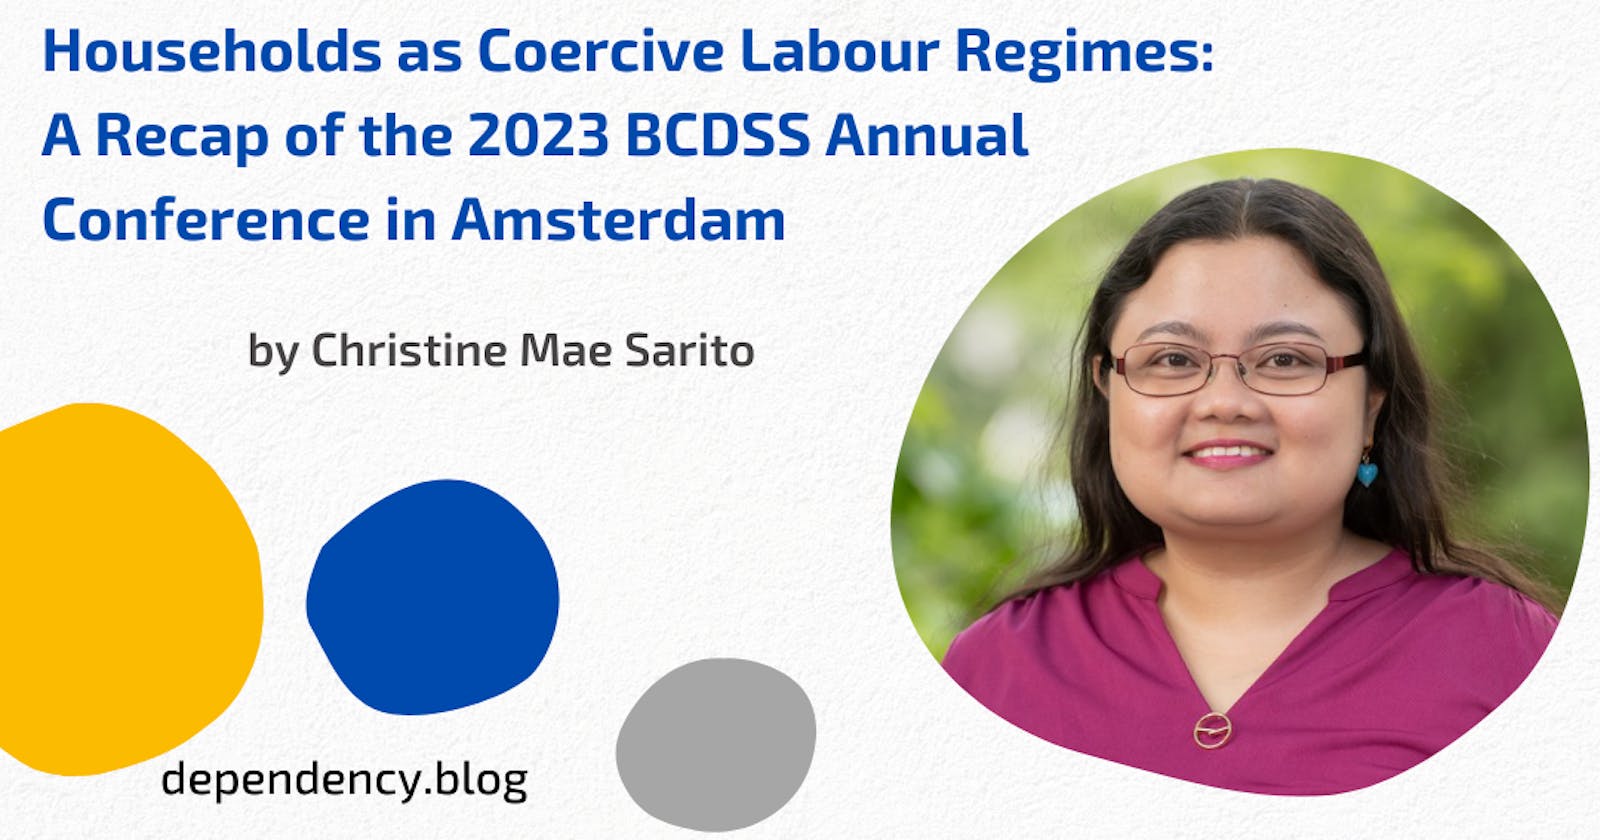 Households as Coercive Labour Regimes: A Recap of the 2023 BCDSS Annual Conference in Amsterdam